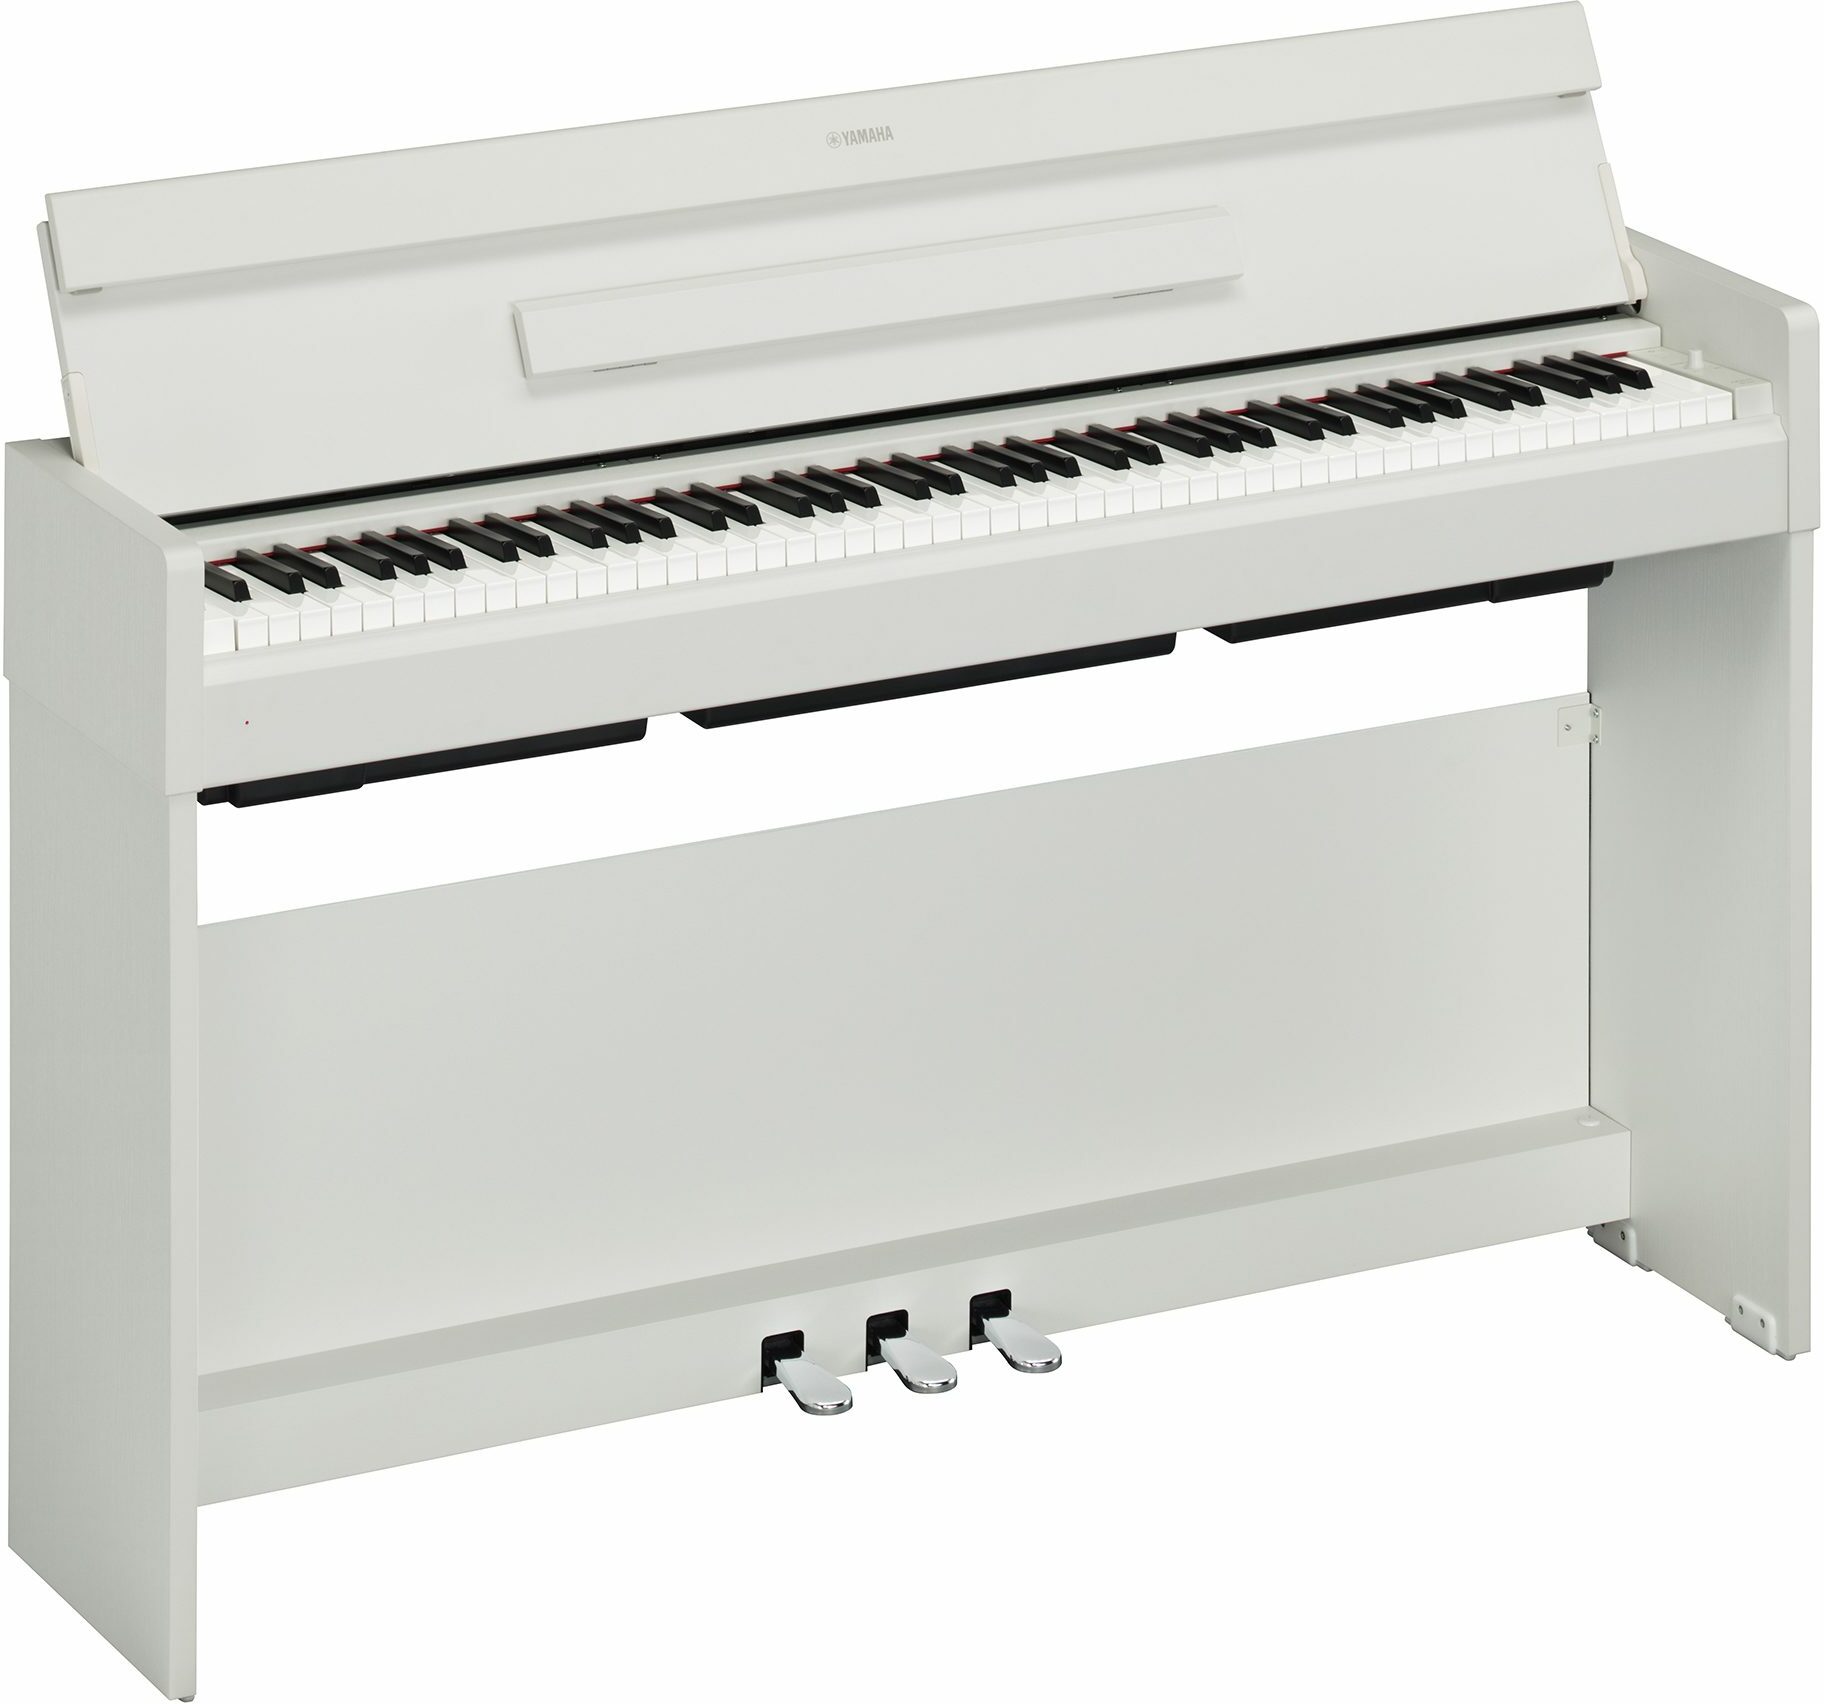 Yamaha Ydp-s34 - White - Digital piano with stand - Main picture